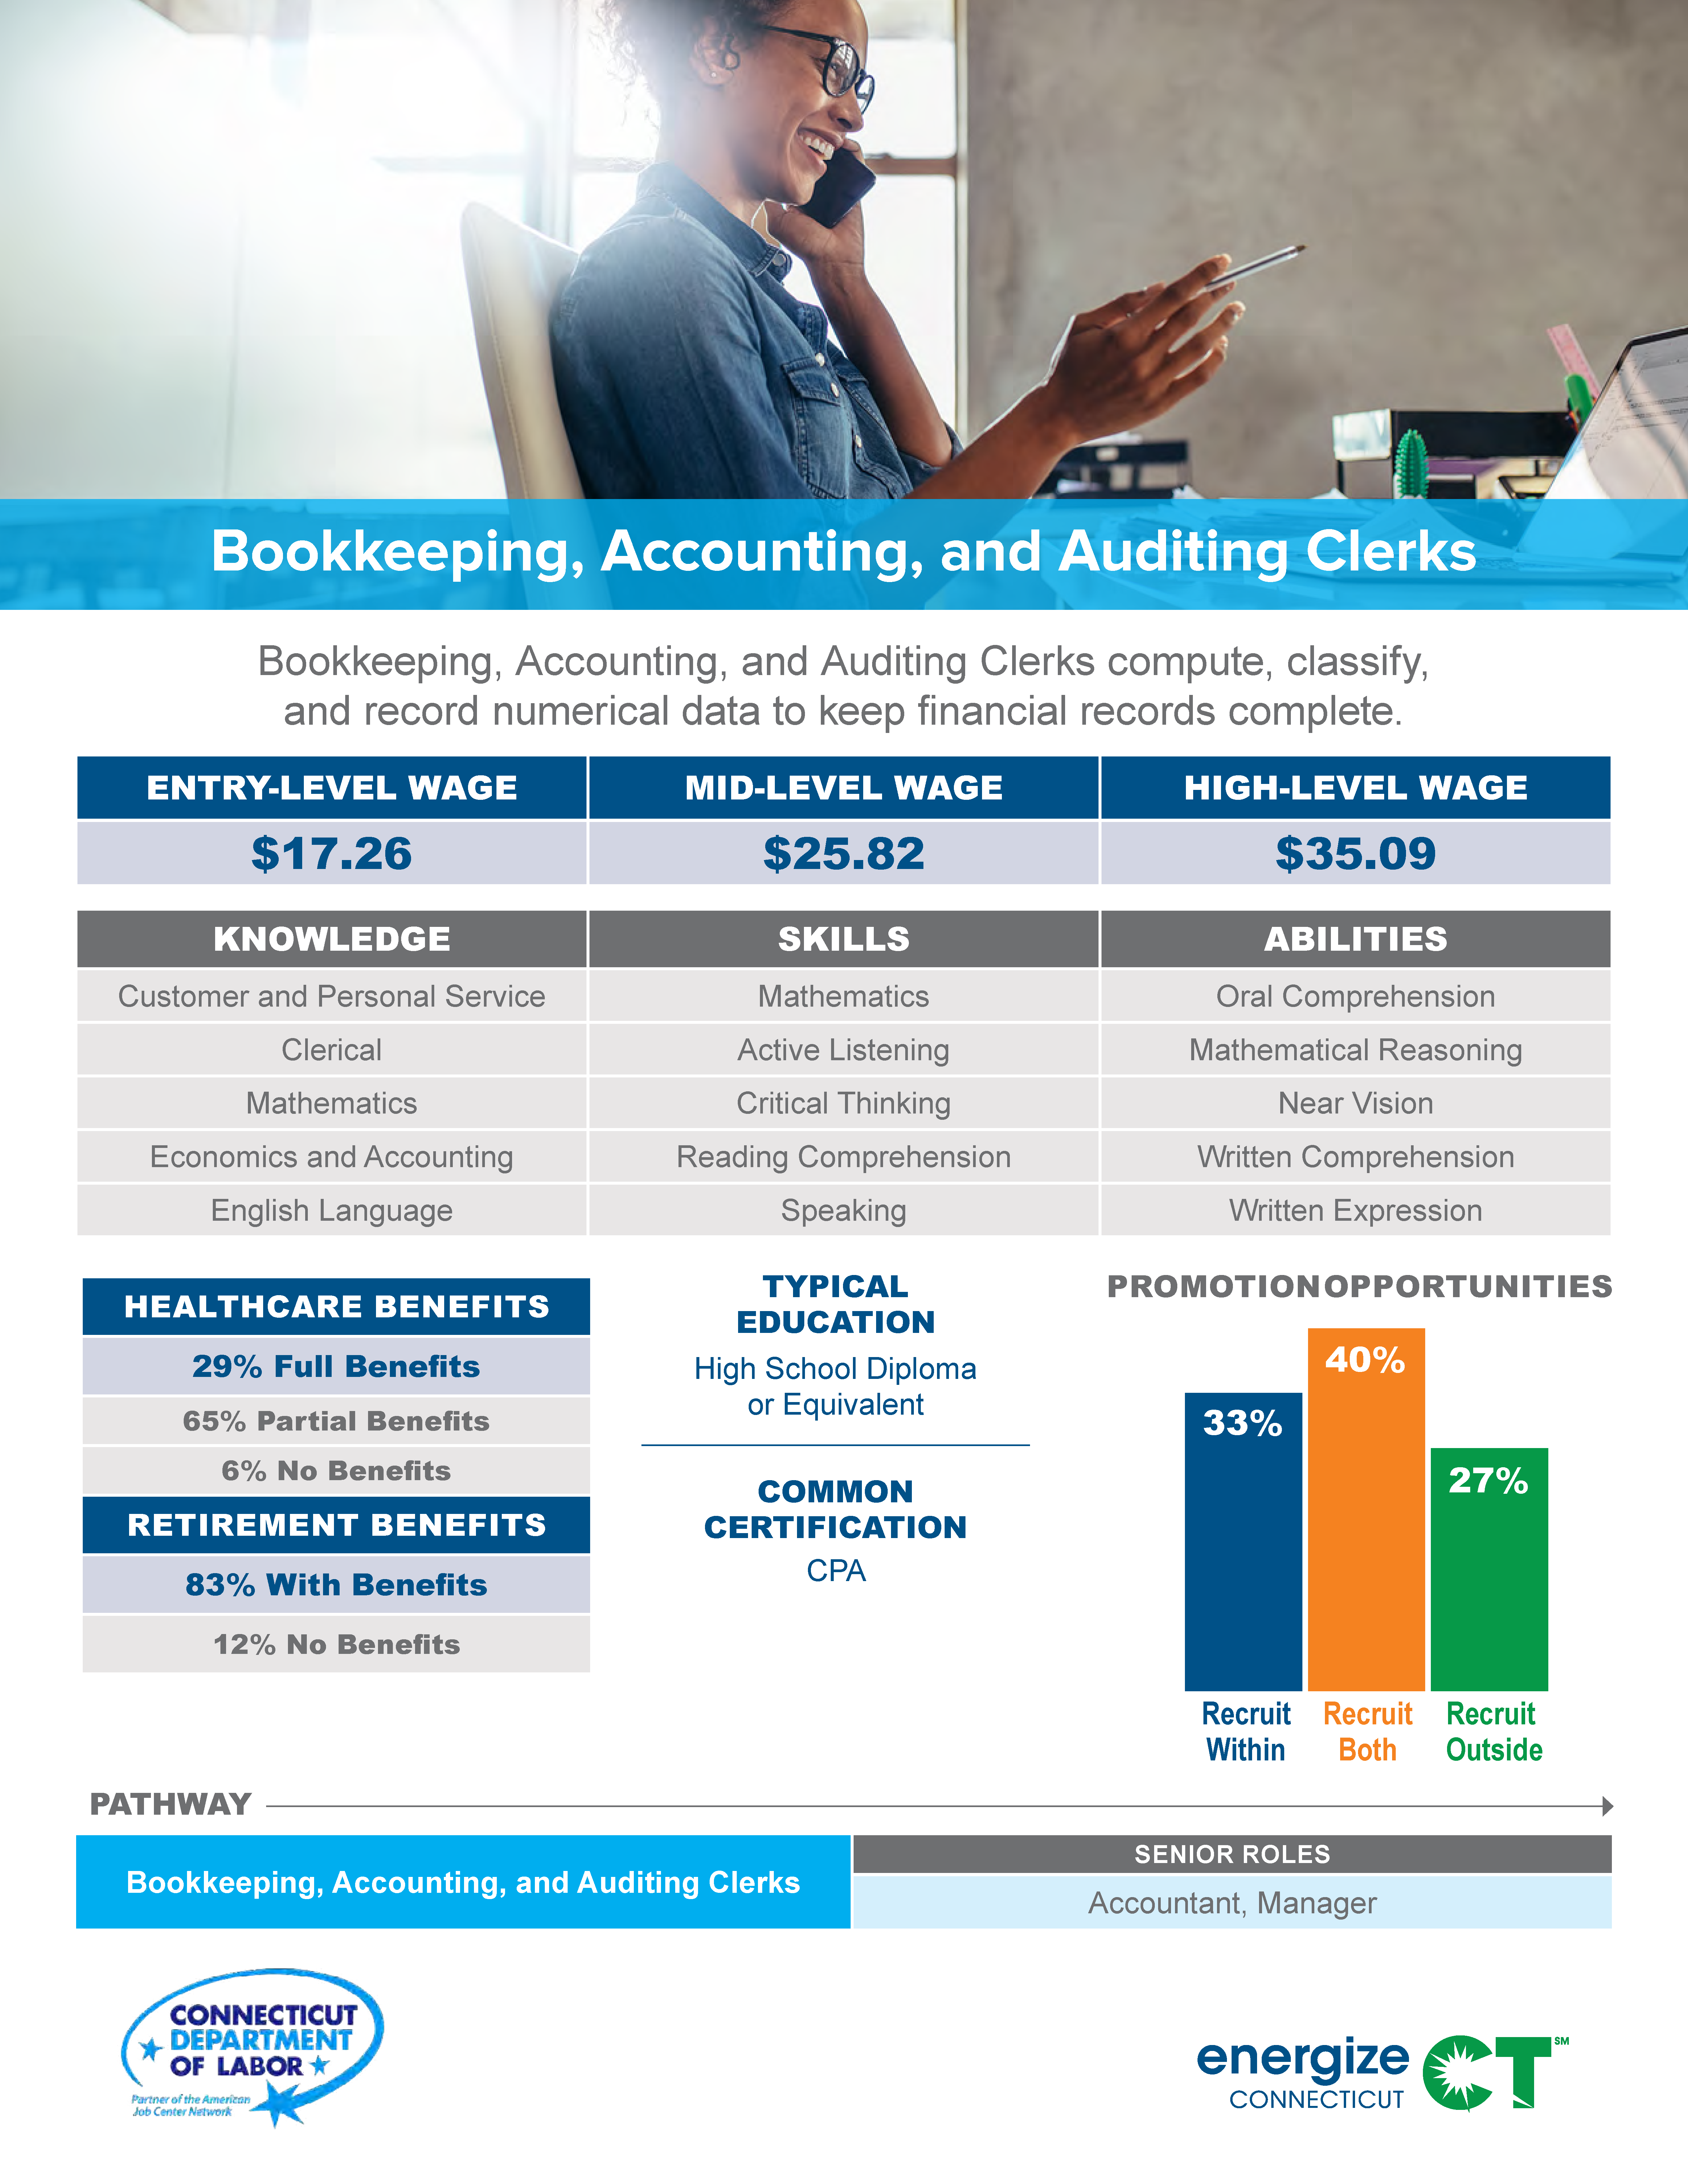 Bookkeeping, Accounting, and Auditing Clerks